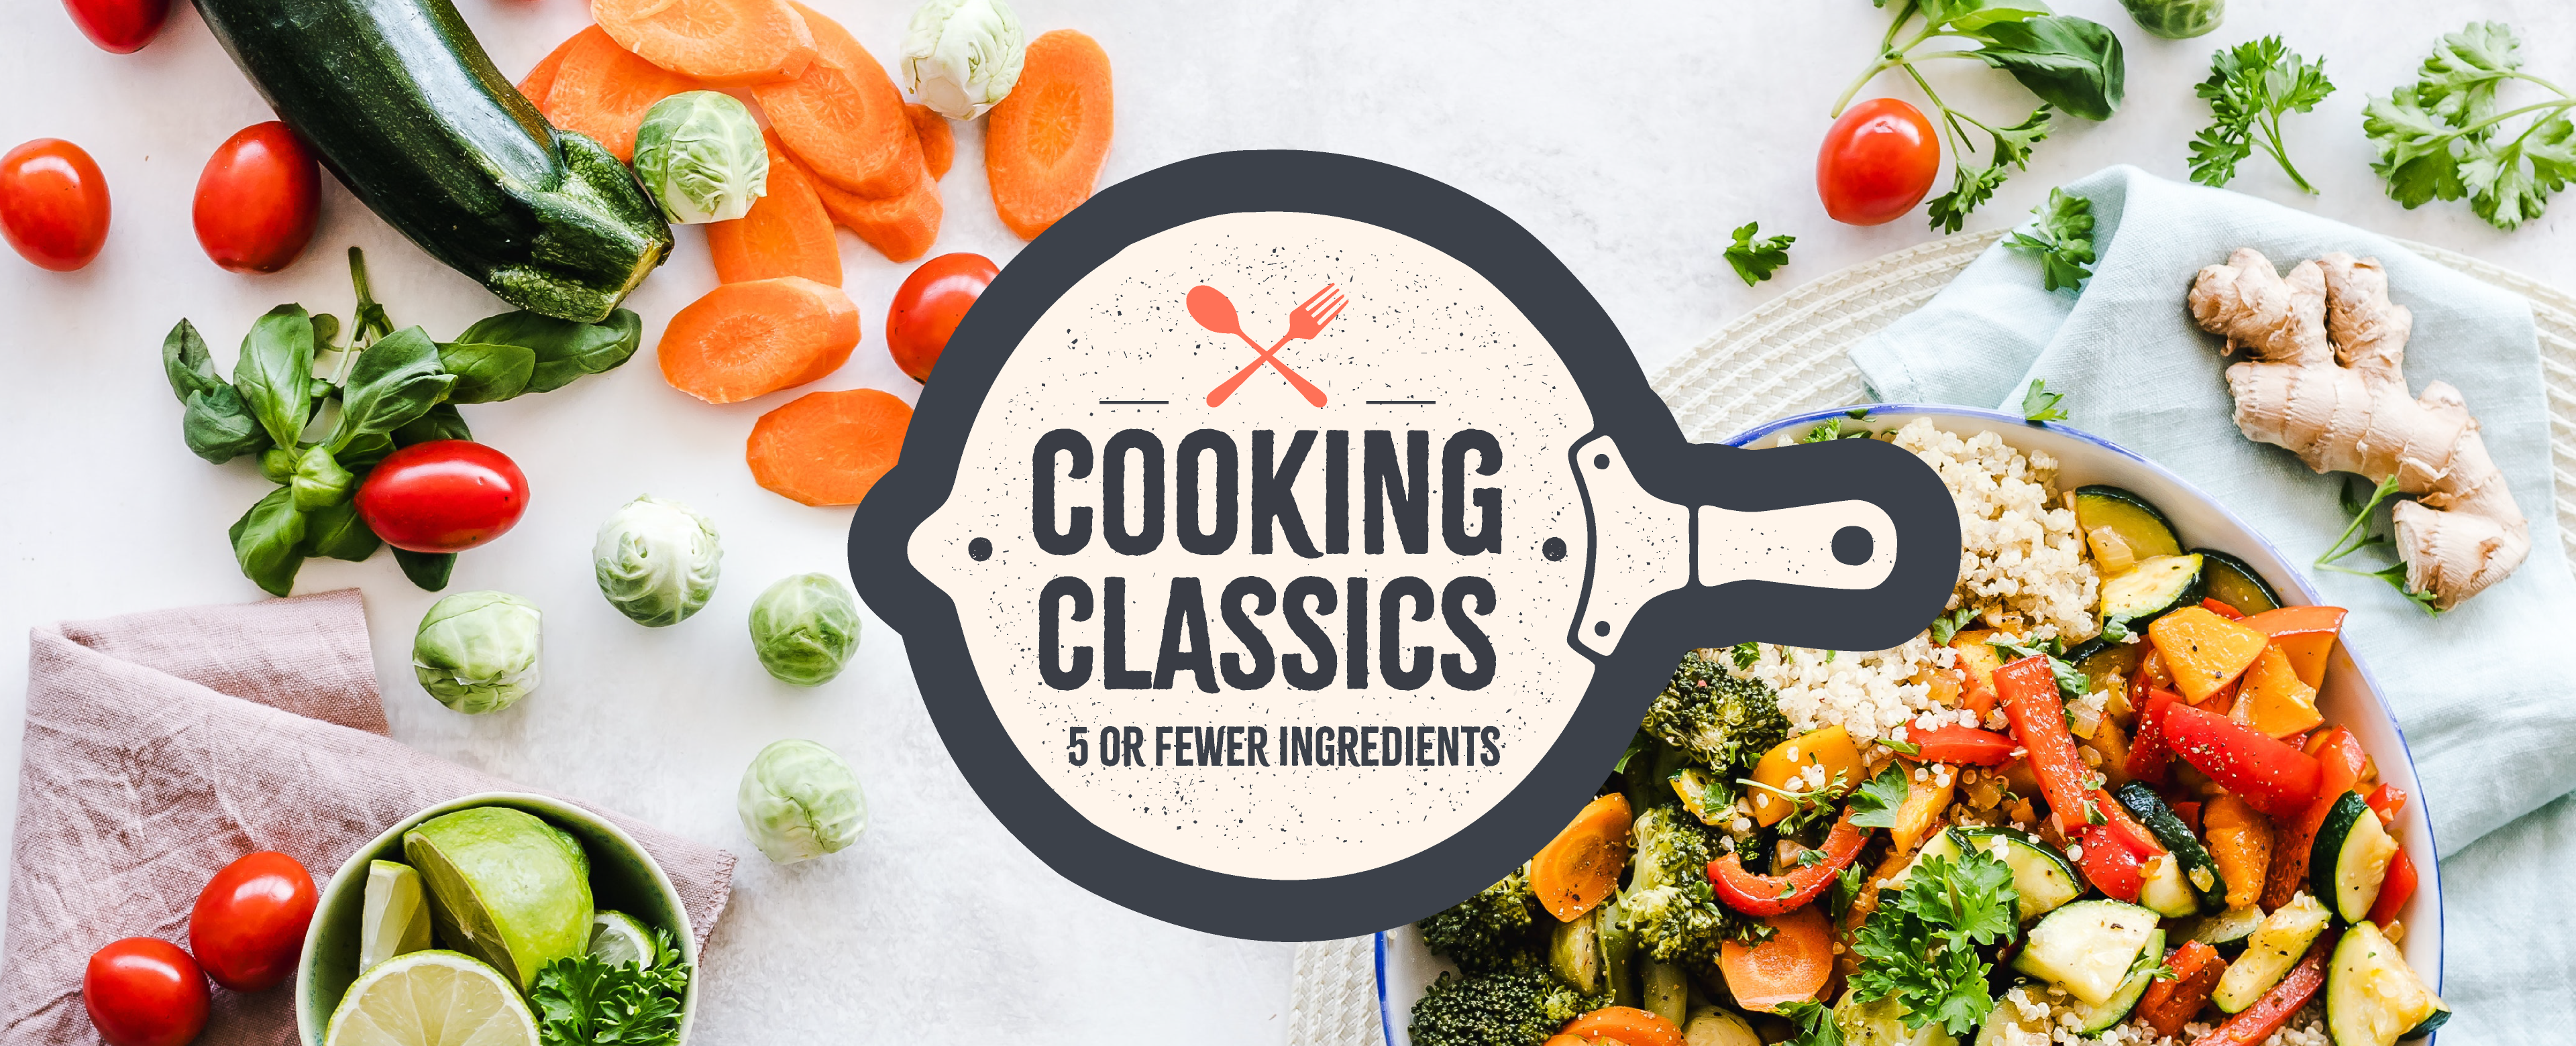 Classic Cooking: Five or Fewer Ingredients